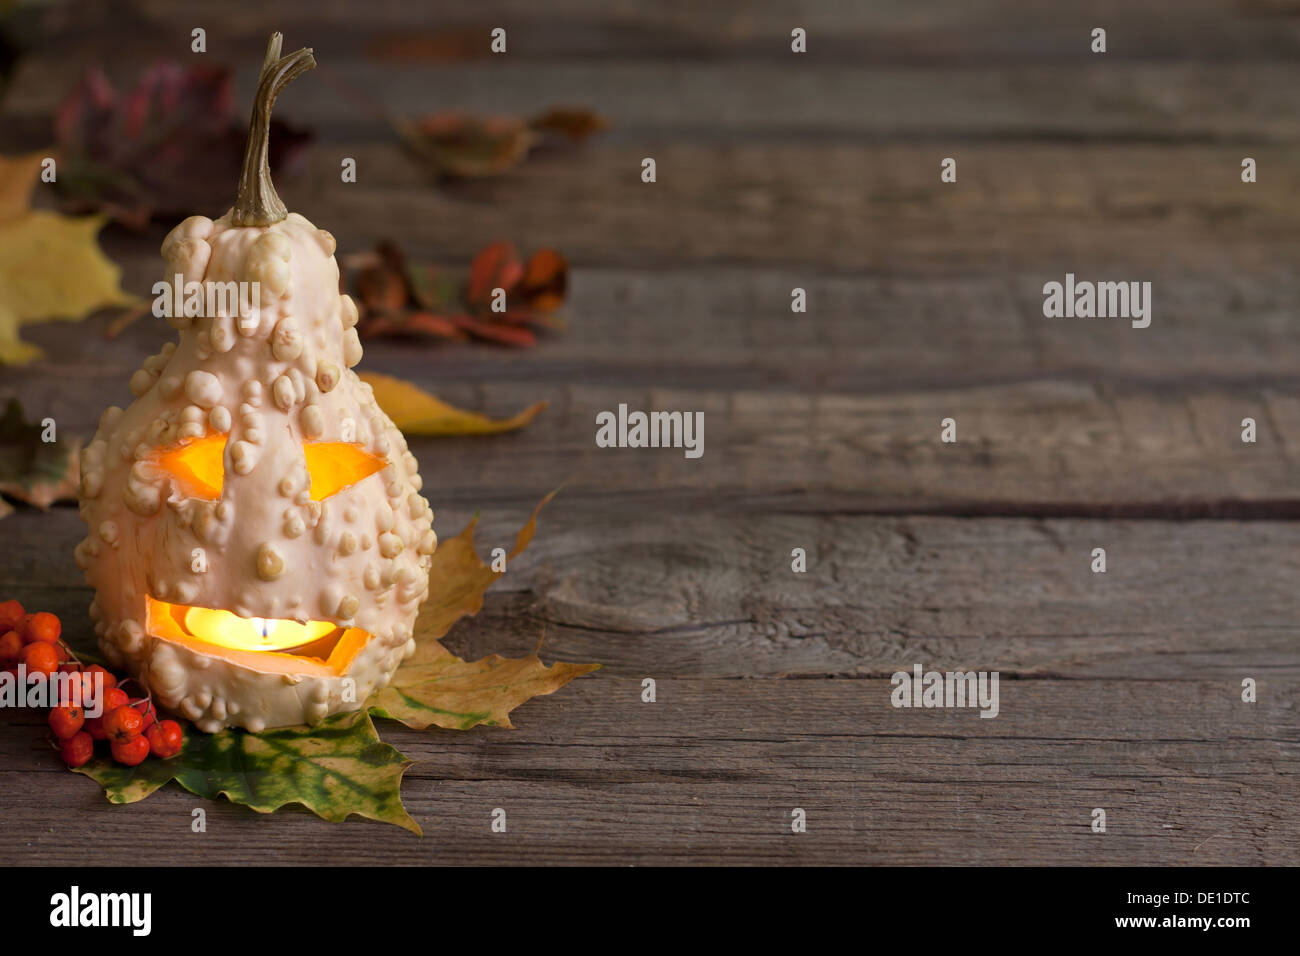 Autumn abstract background with halloween pumpkin on wooden boards Stock Photo